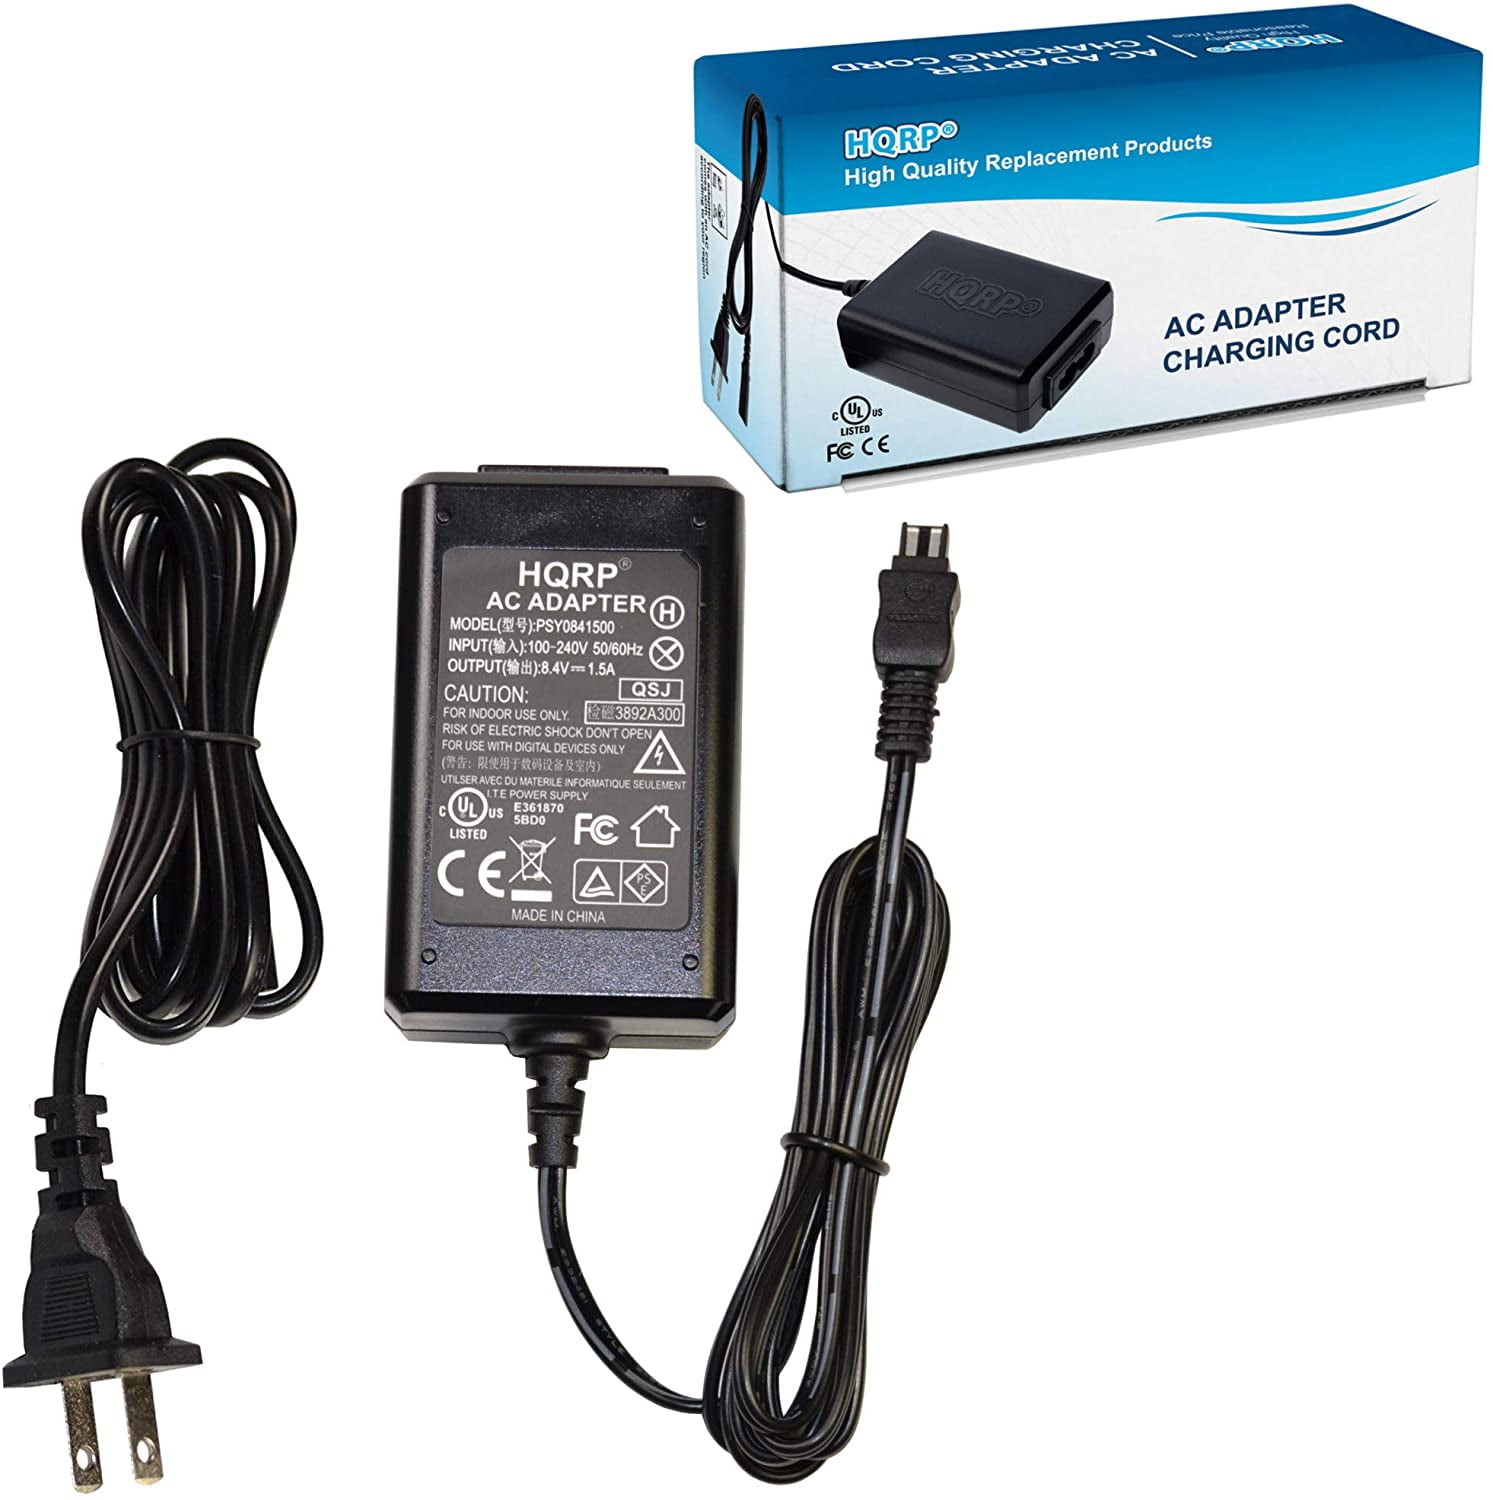 blush Greenland Fitness HQRP Replacement AC Adapter / Charger compatible with Sony HandyCam HDR-SR5  / HDR-SR5C, HDR-SR8, HDR-SR10 / HDR-SR10D, HDR-SR11, HDR-SR12 Camcorder  with USA Cord & Euro Plug Adapter - Walmart.com